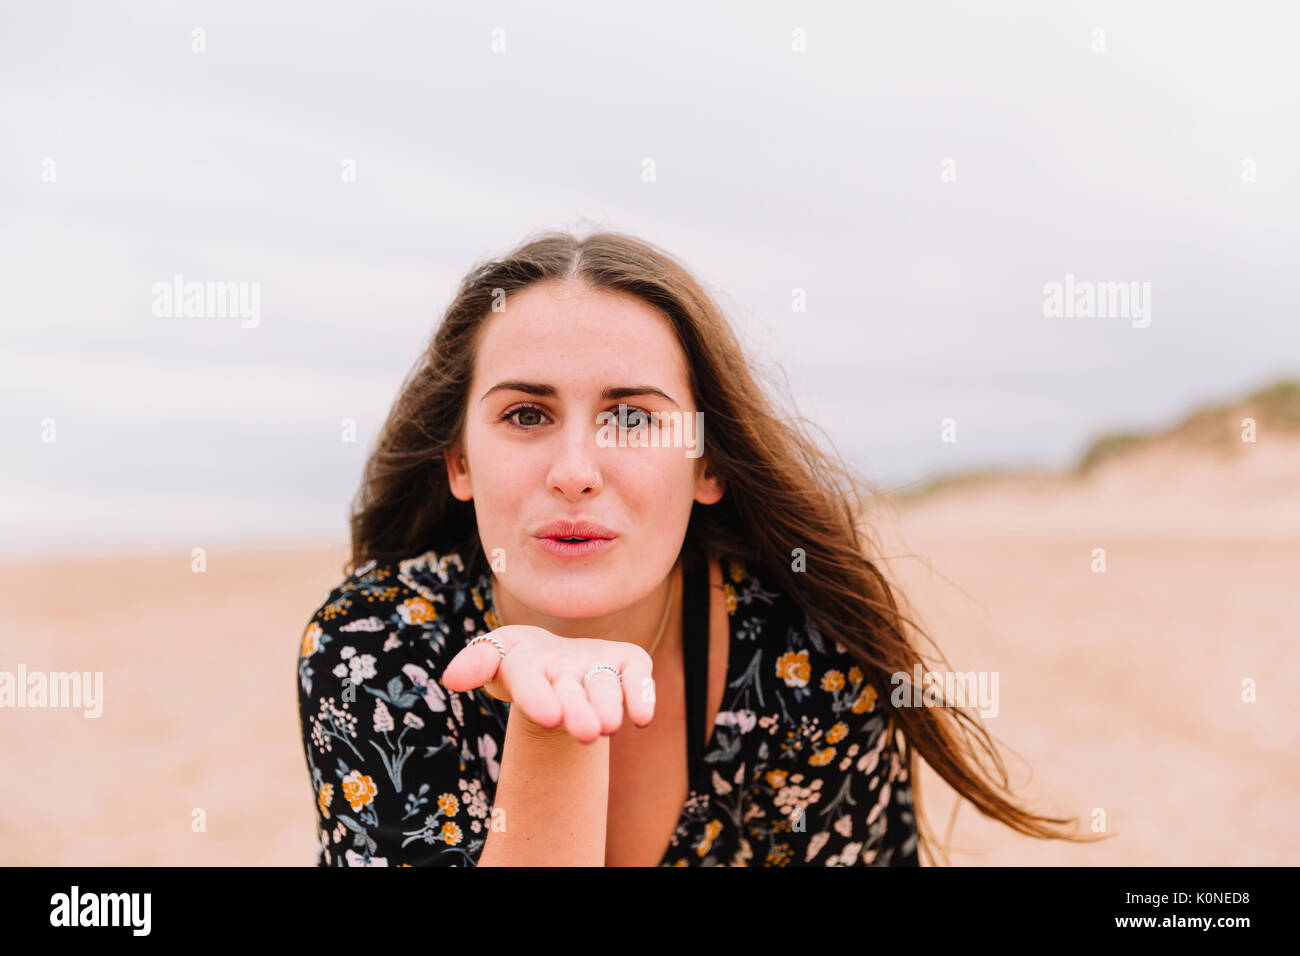 Portrait of young woman blowing kiss on the beach Stock Photo